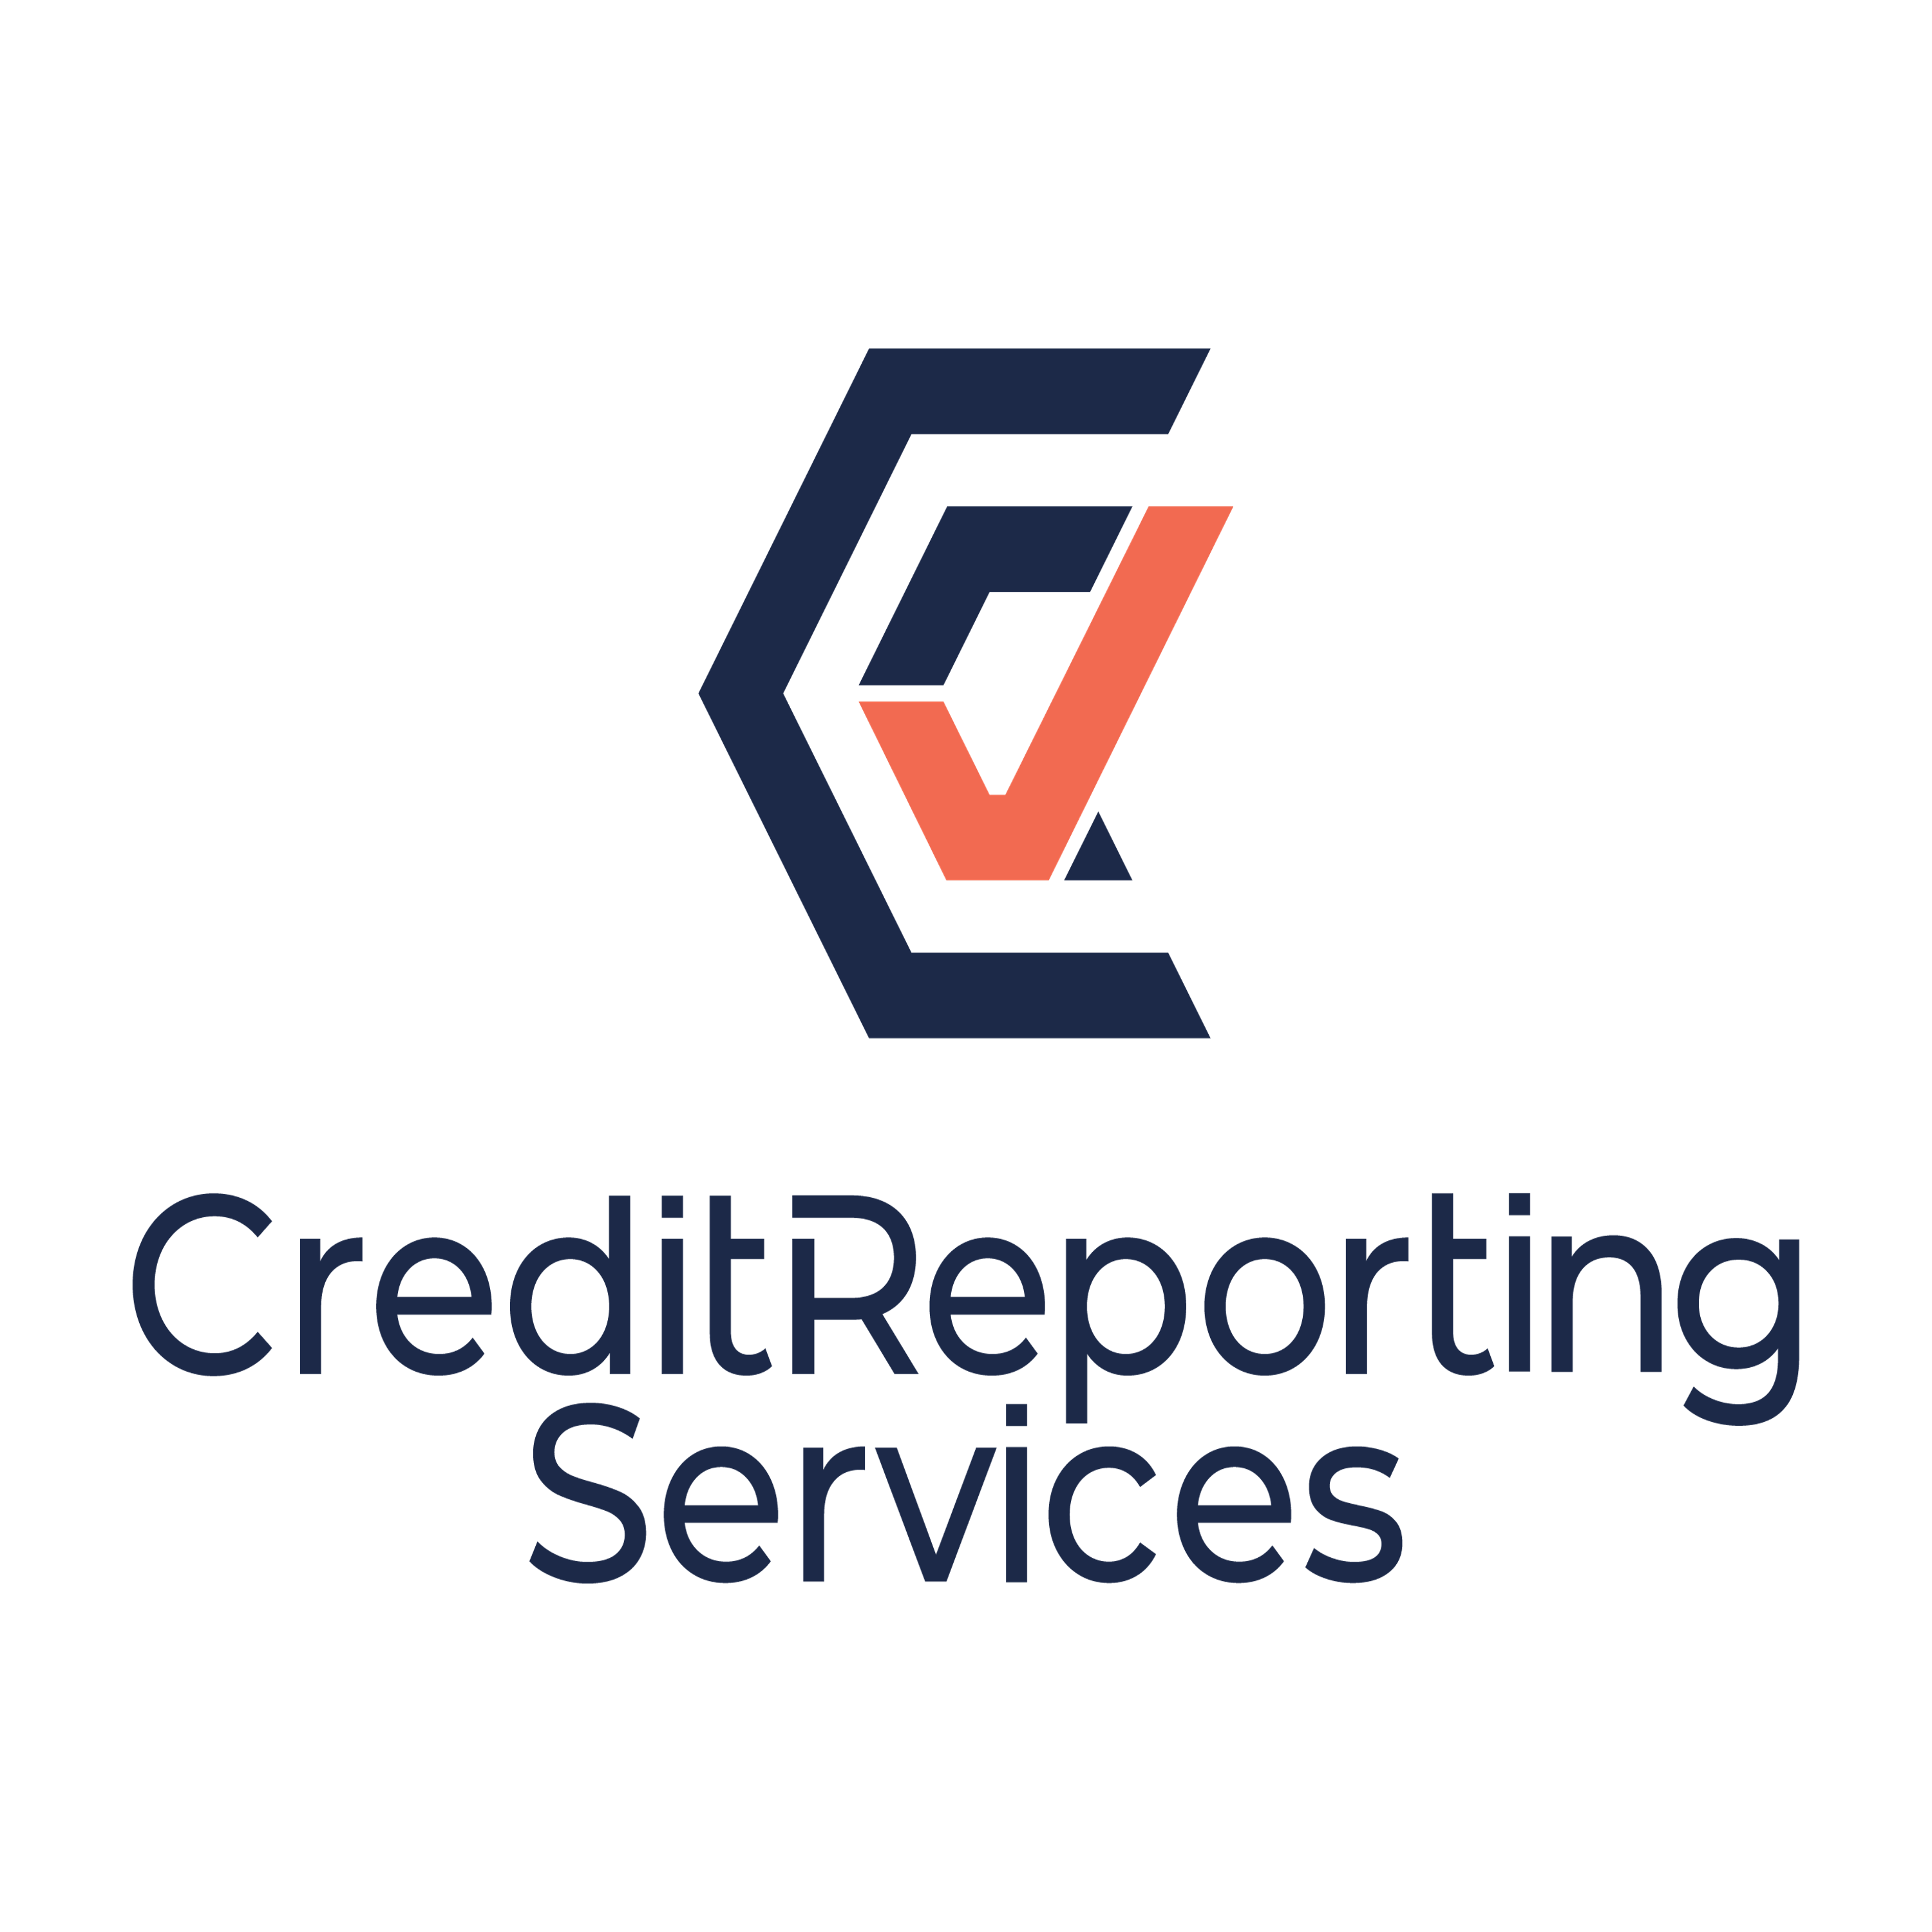 Credit Reporting Services logo